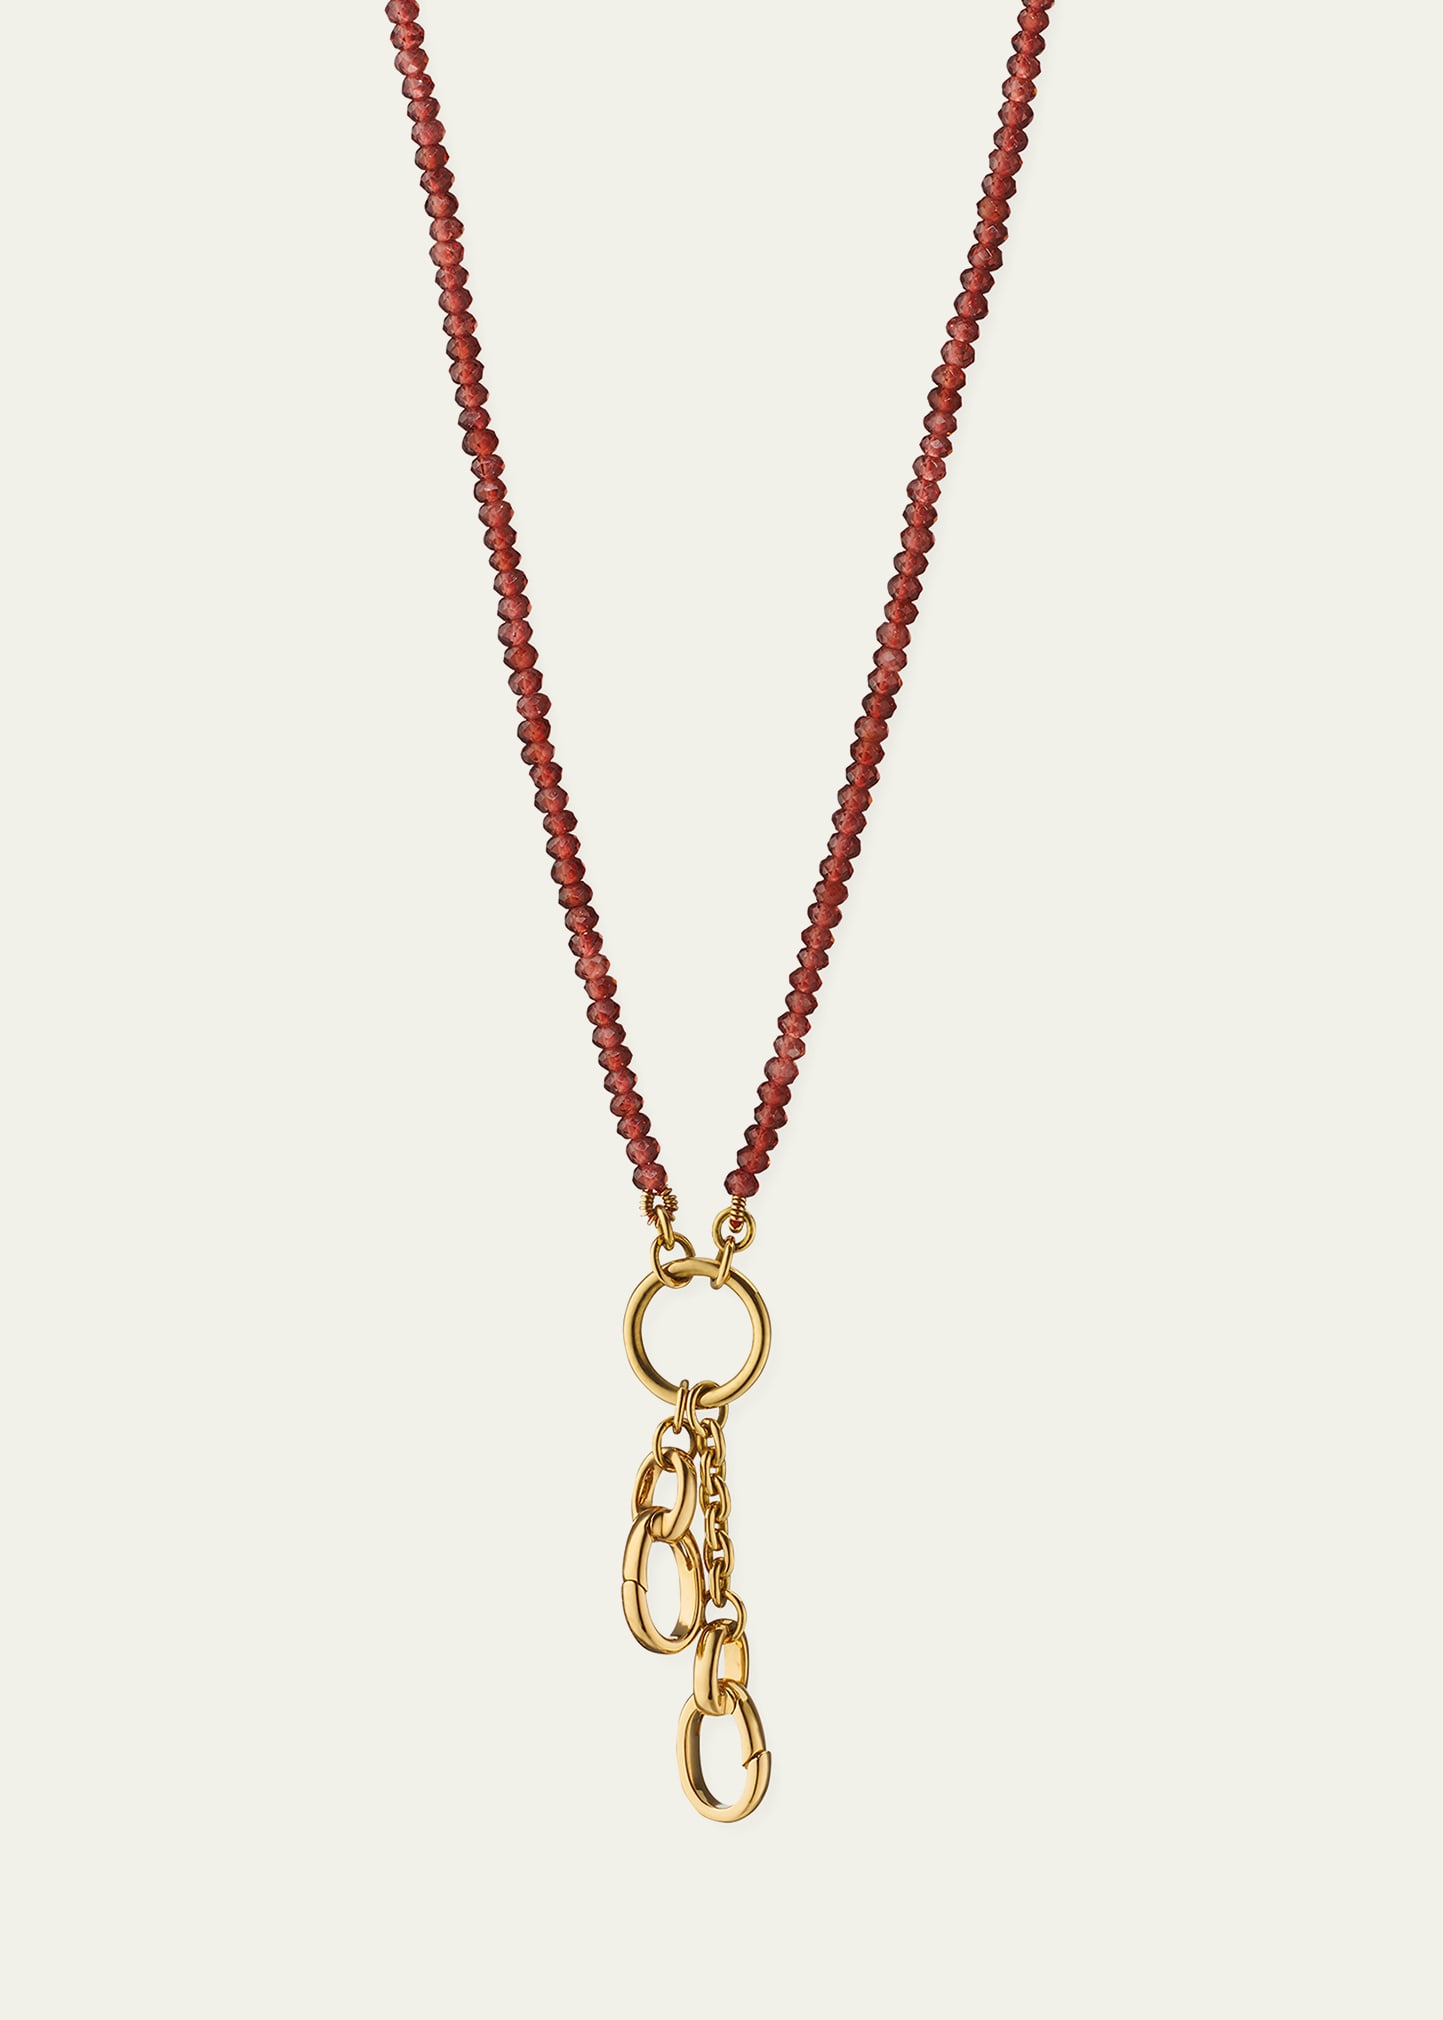 18" 18k Yellow Gold Enhancer Chain Necklace w/ Facetted Garnet Beads